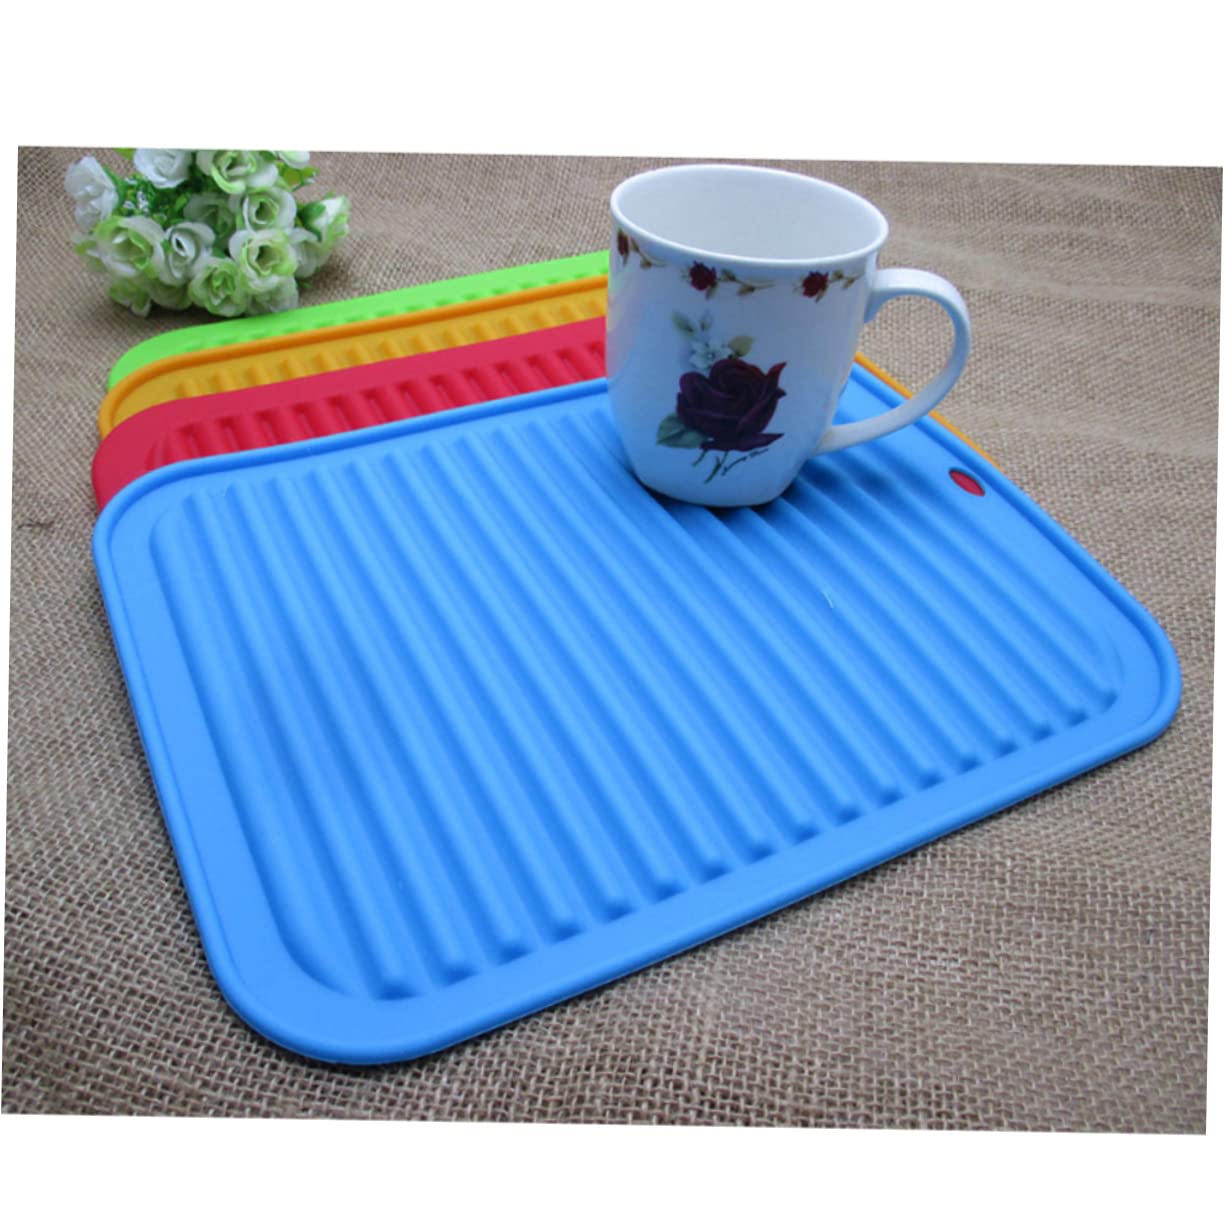 NOLITOY 3pcs Silicone Mat Dish Drying Mats Insulation Pad Silicone Mat Drain Tray Non-slip Pad Dining Table